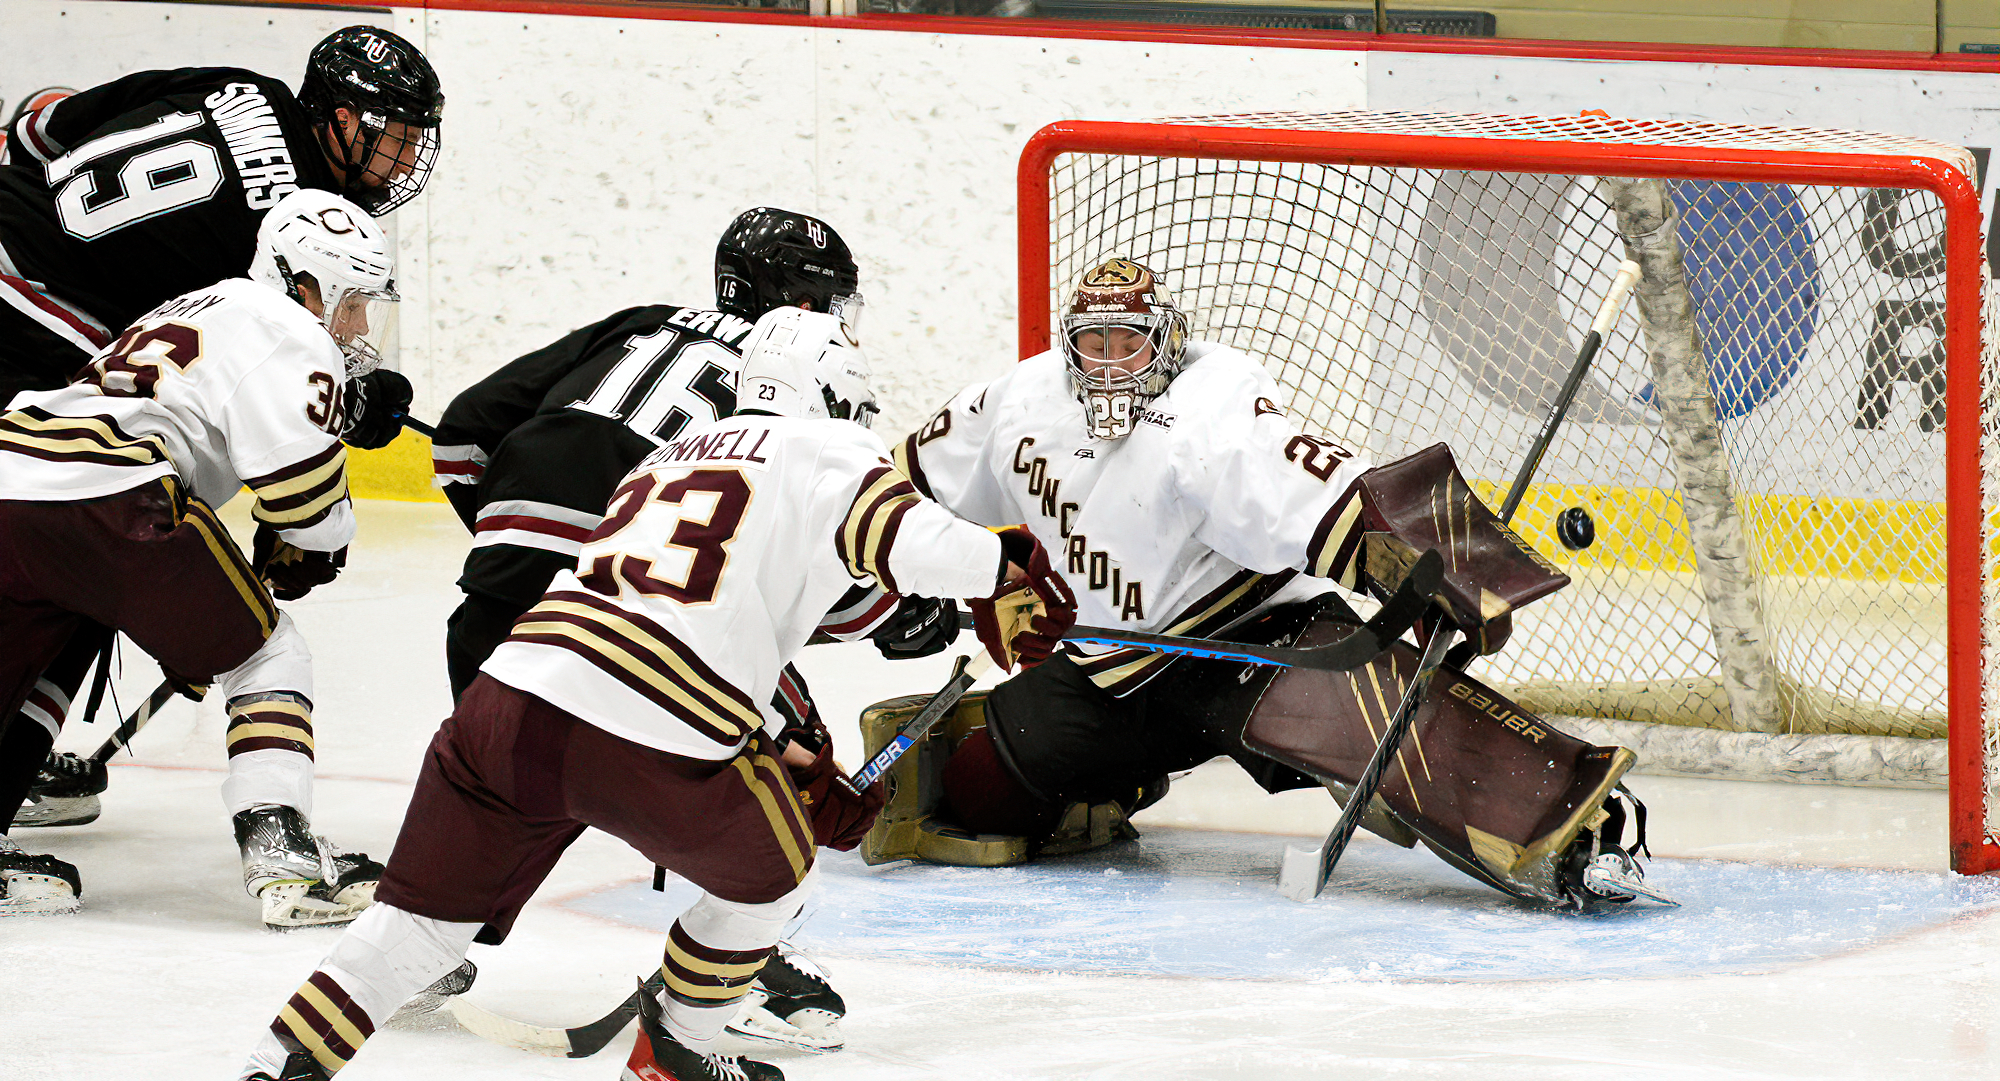 Junior goalie Aaron Dickstein makes one of his 24 saves in the Cobbers' 2-1 win over Hamline that clinched the series sweep for CC.